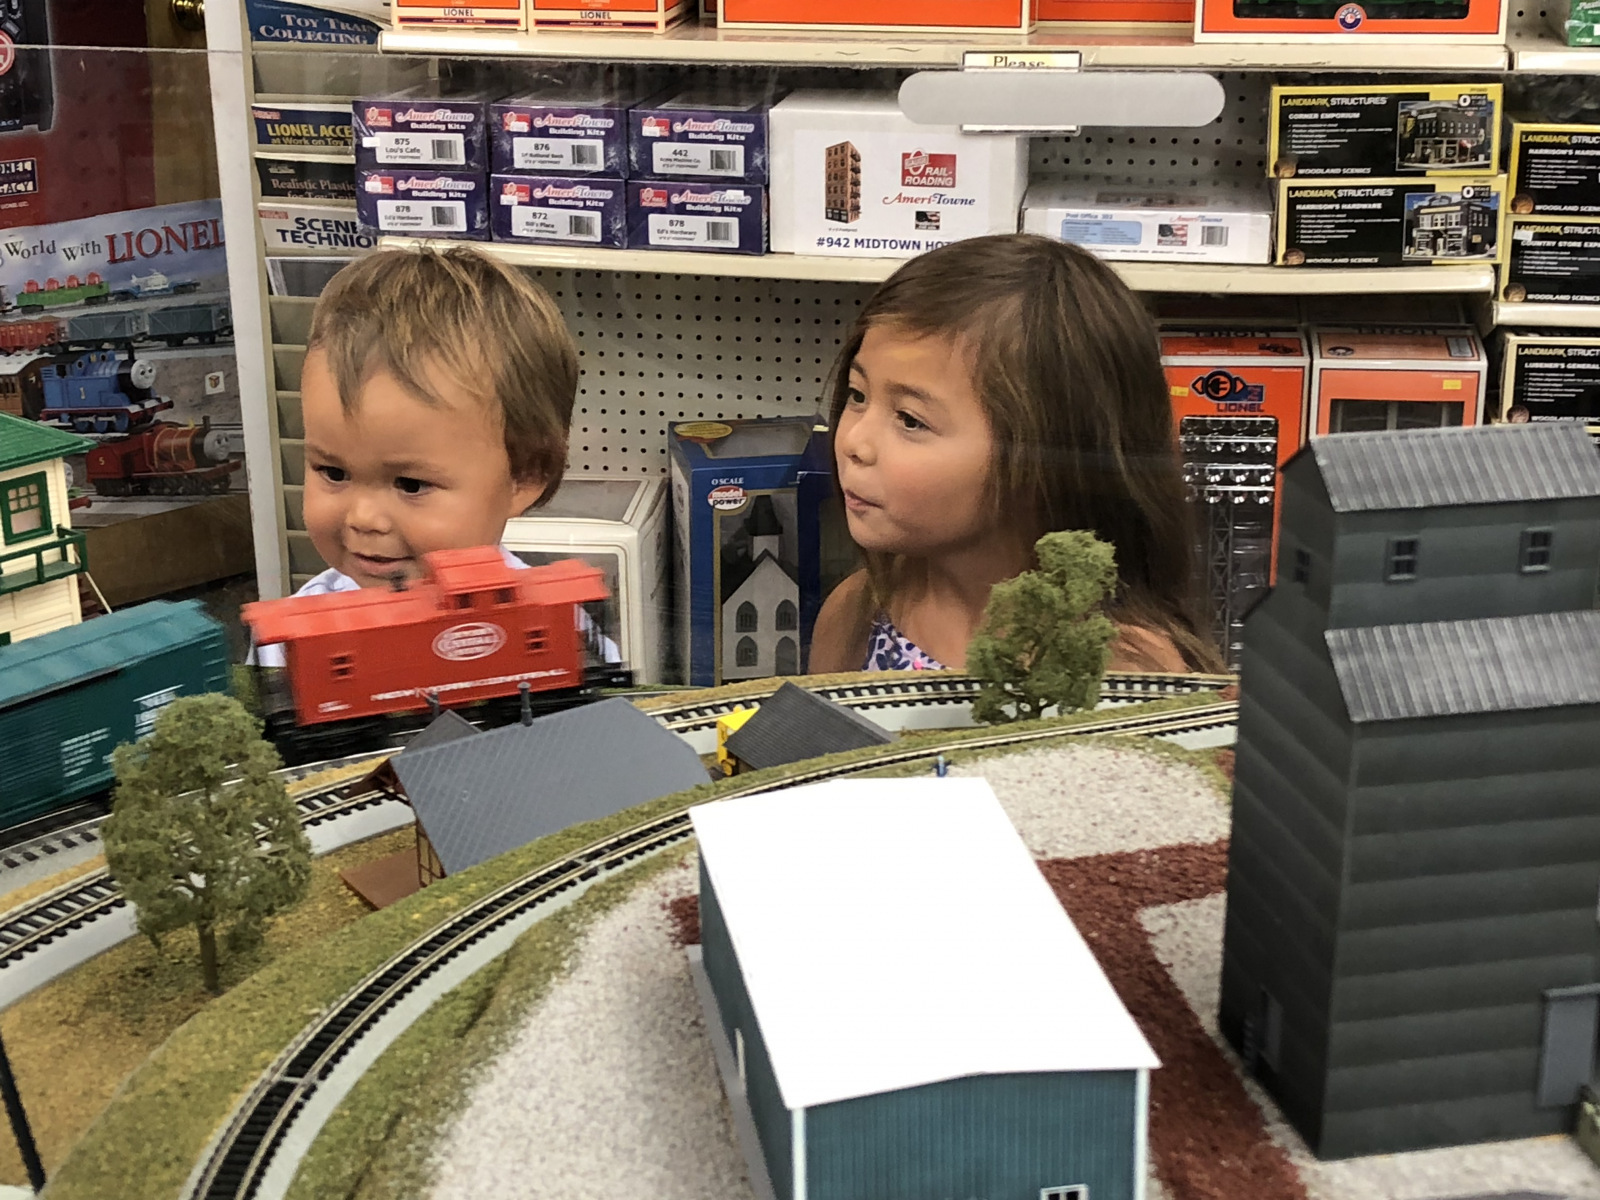 Everyone loves toy trains!